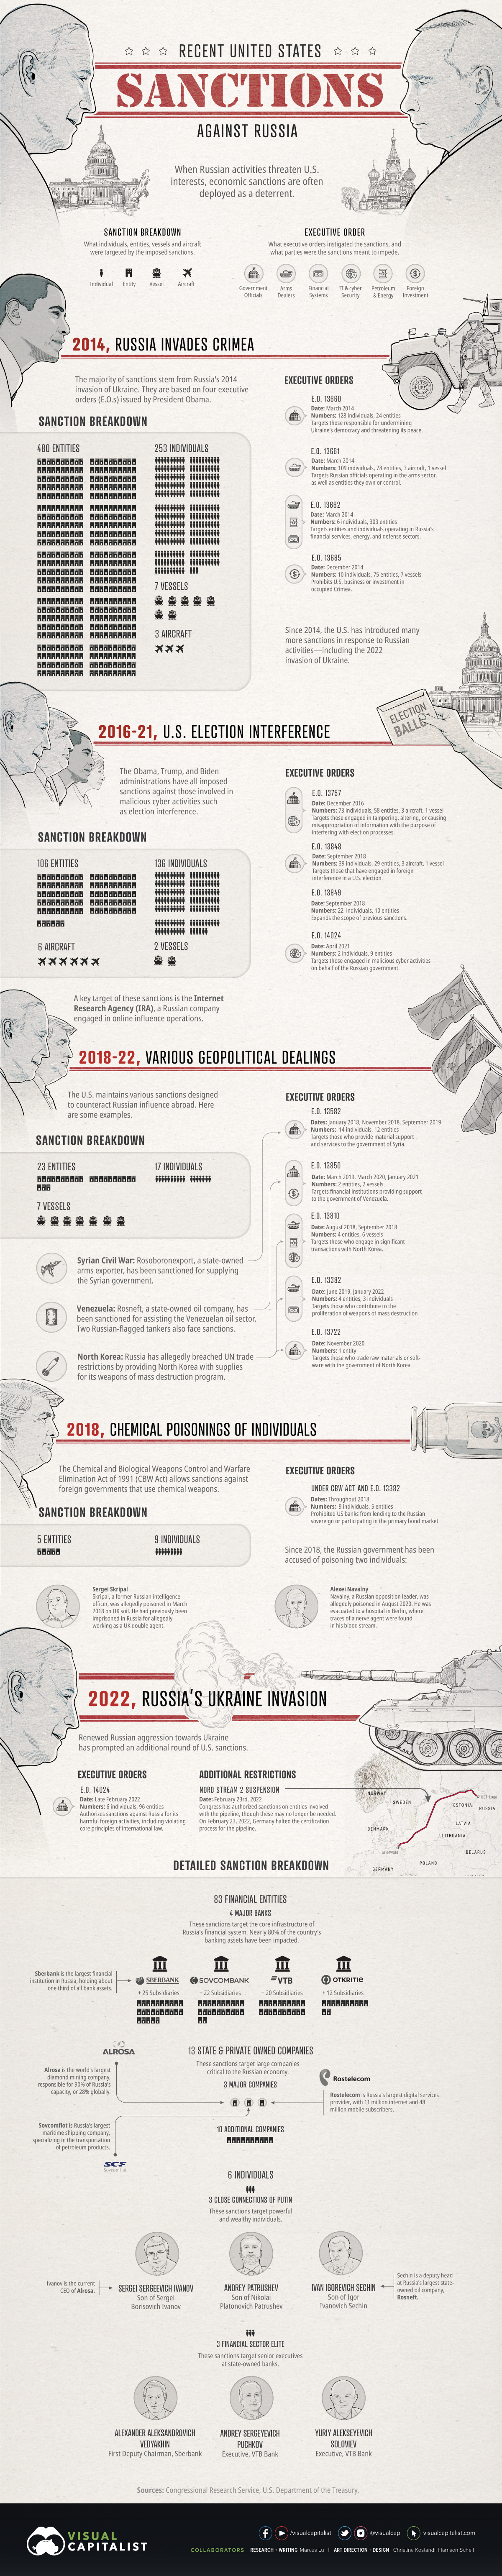 infographic listing U.S. sanctions on Russia